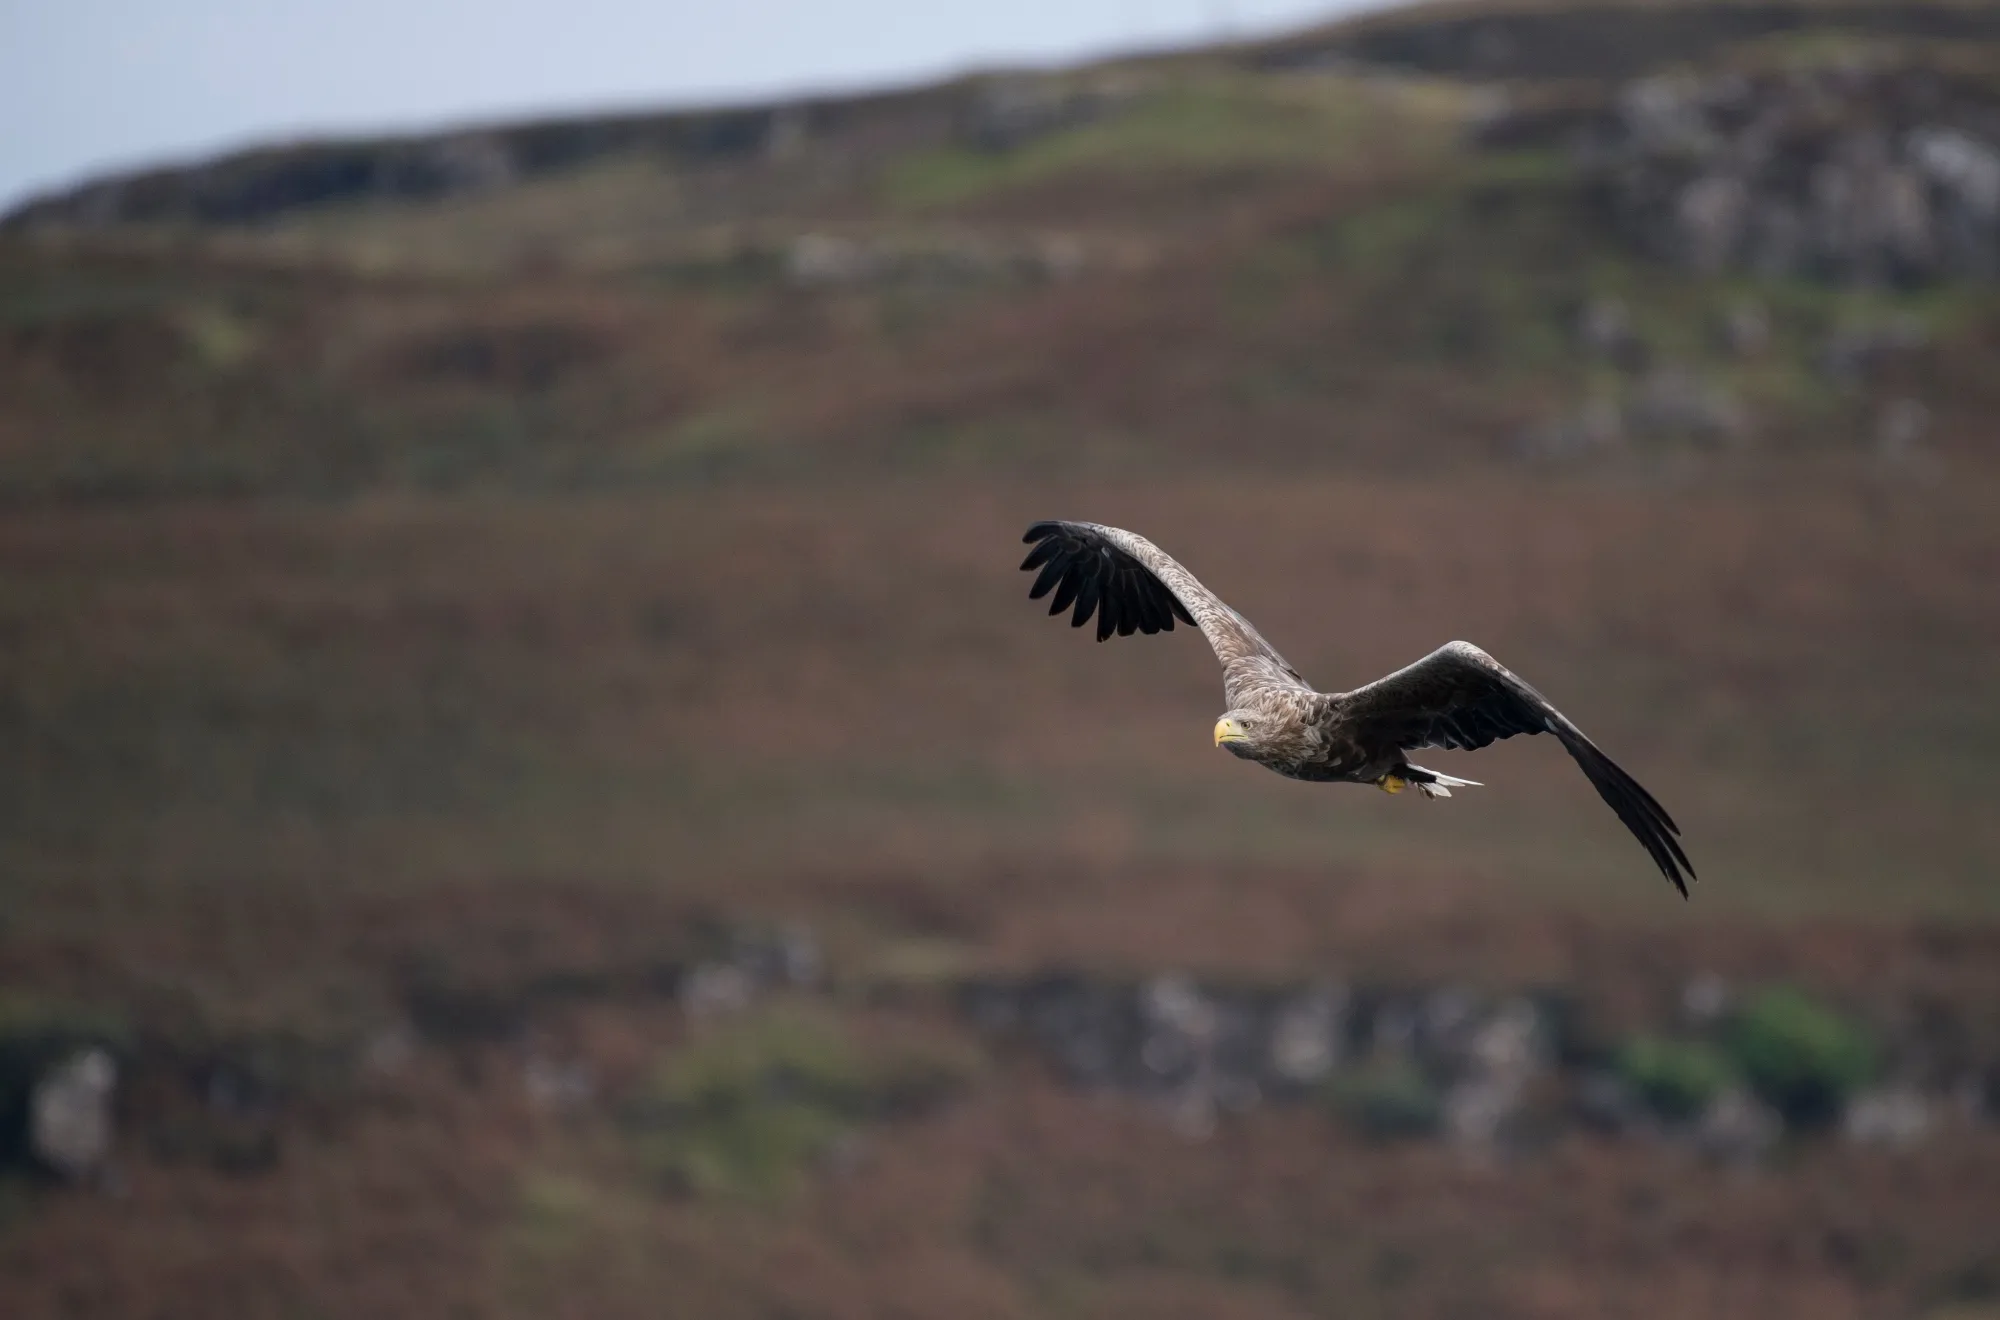 A White-tailed Eagle in flight preparing to catch a fish